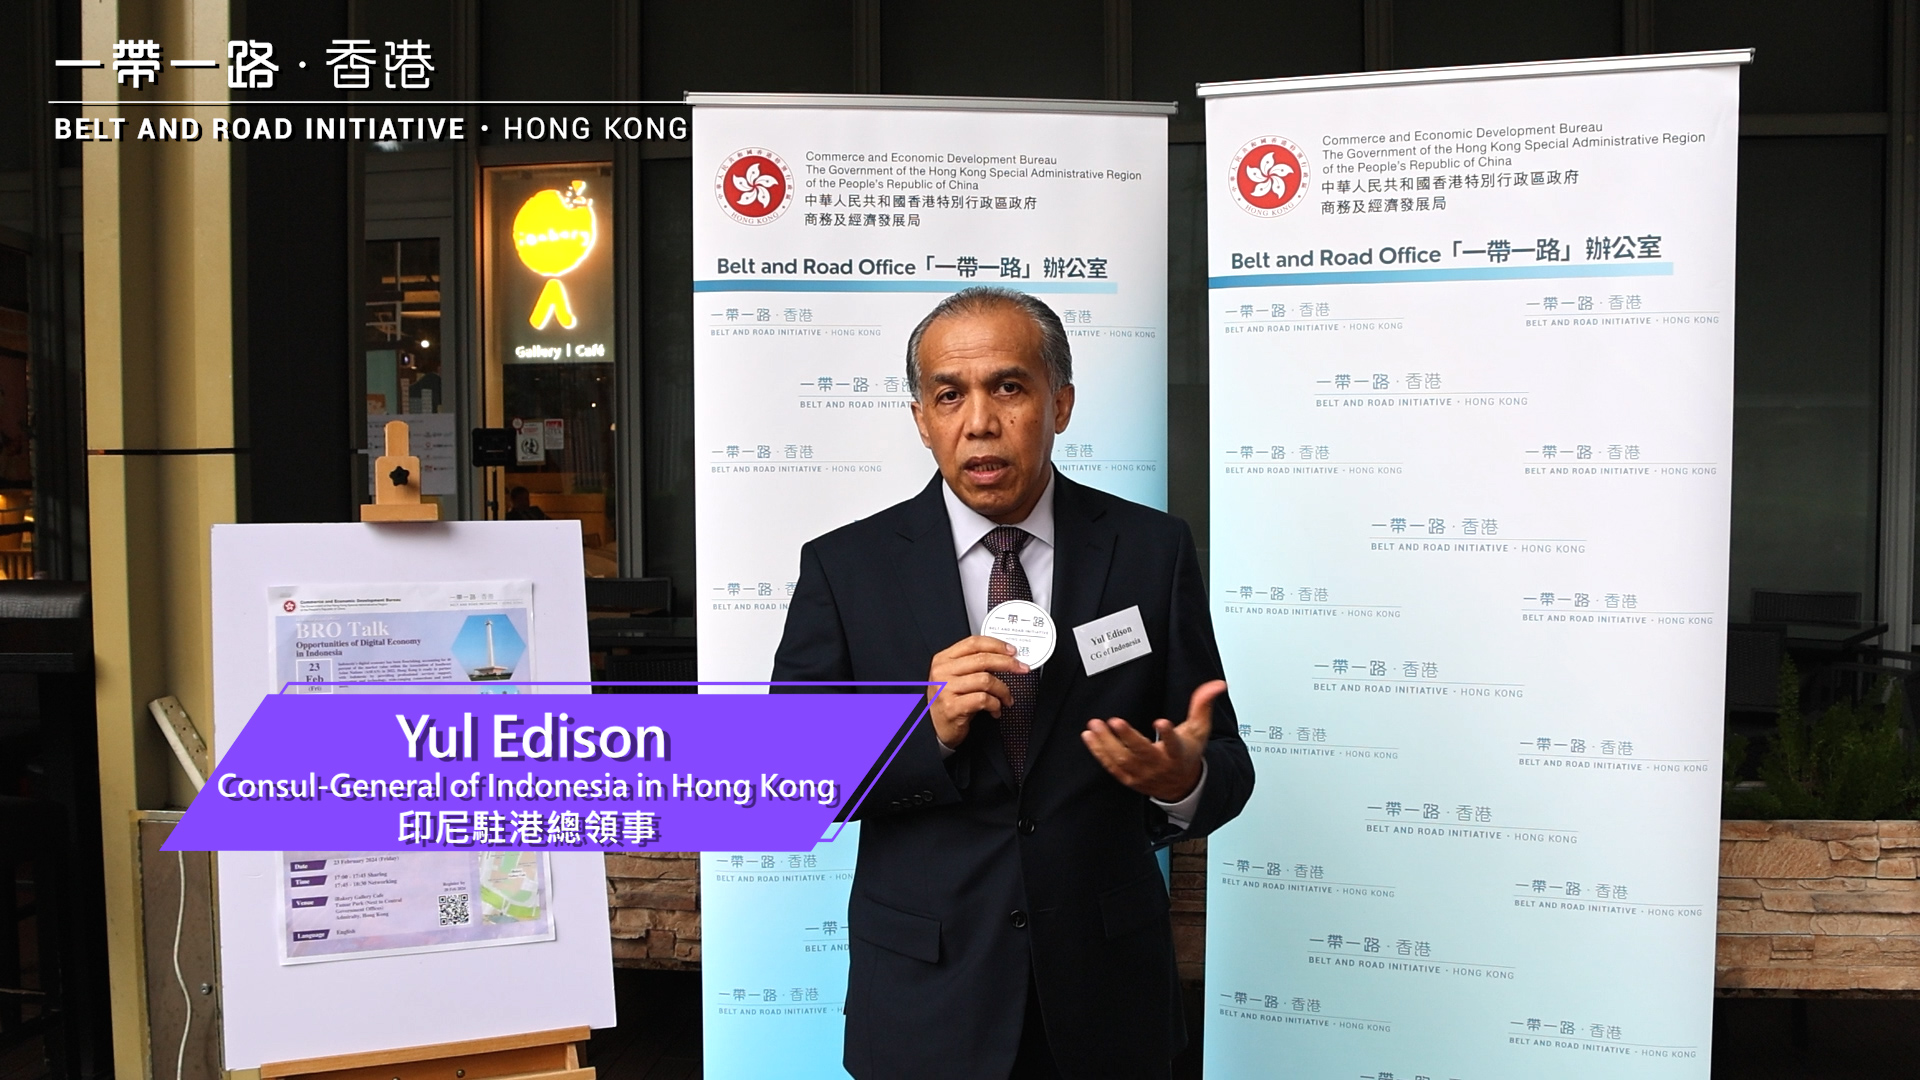 Interview with Mr Yul Edison